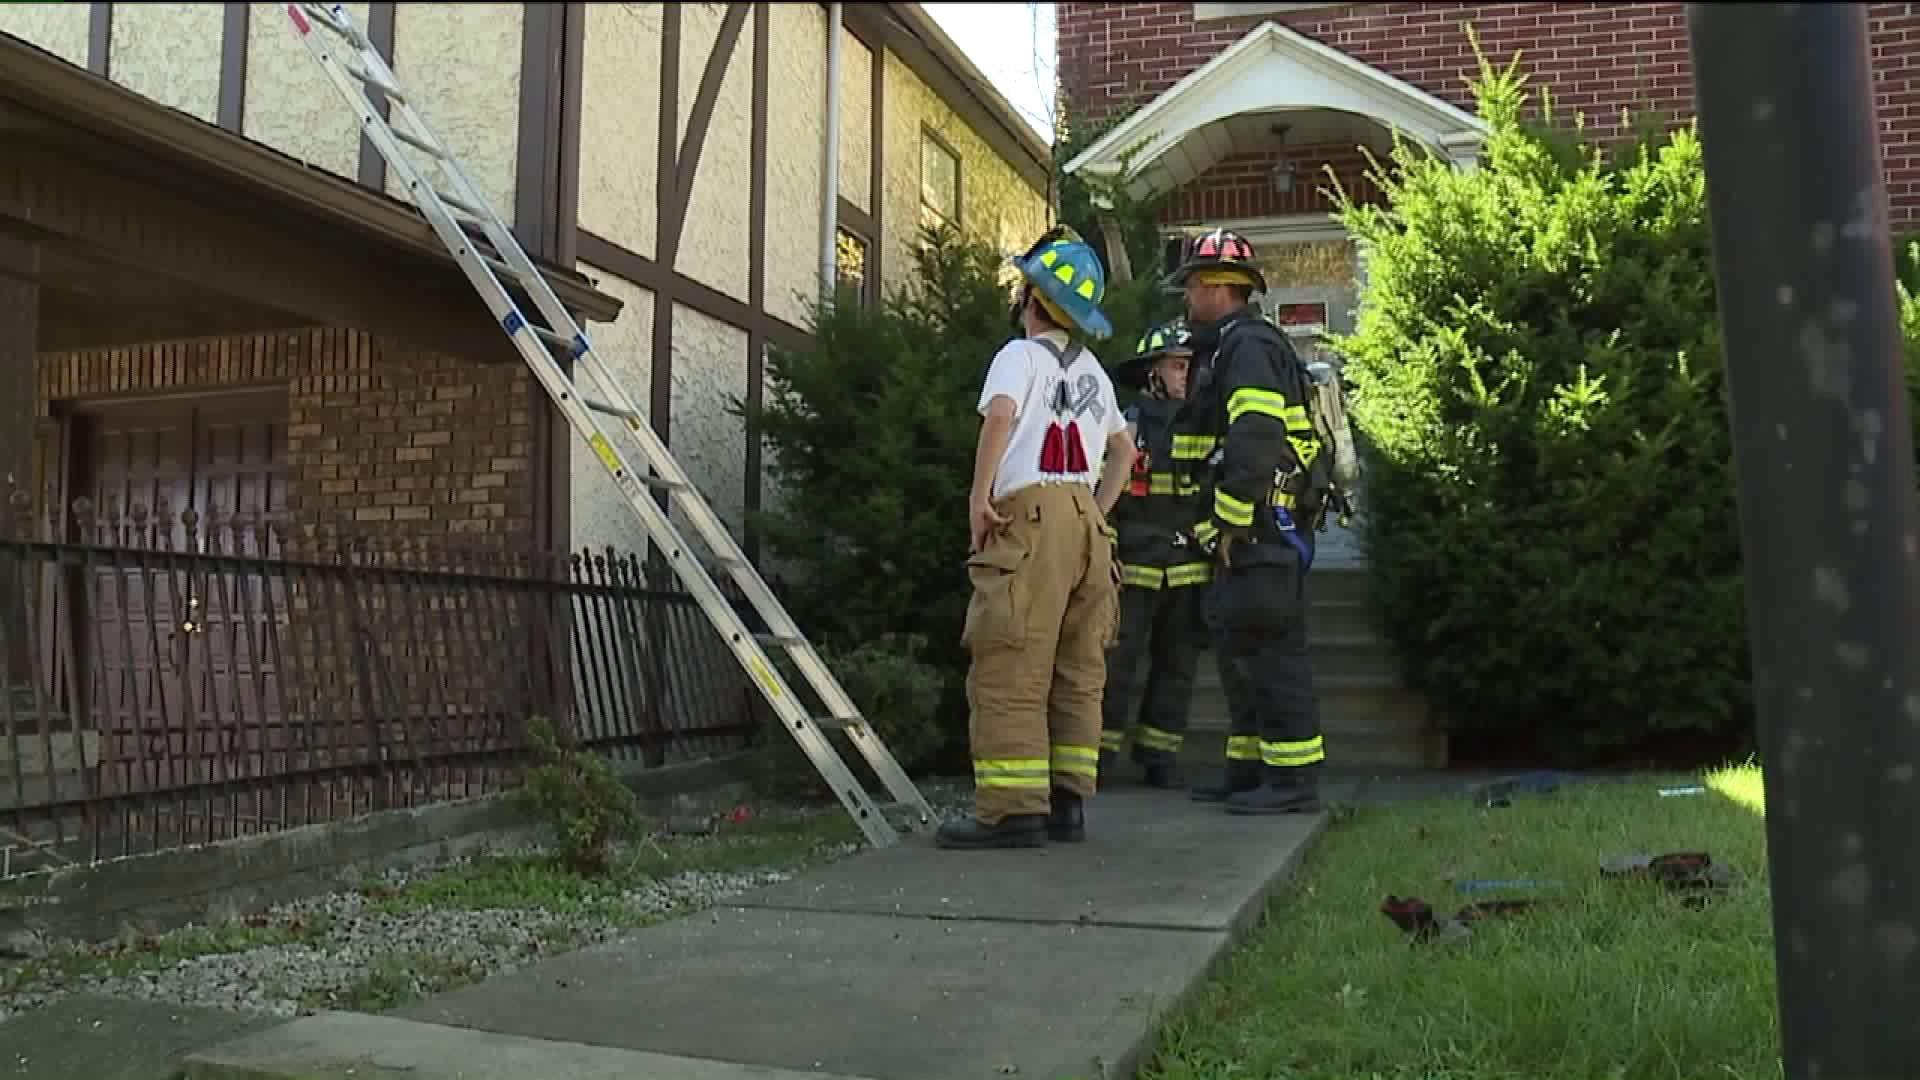 Firefighters Use Former Church for Training